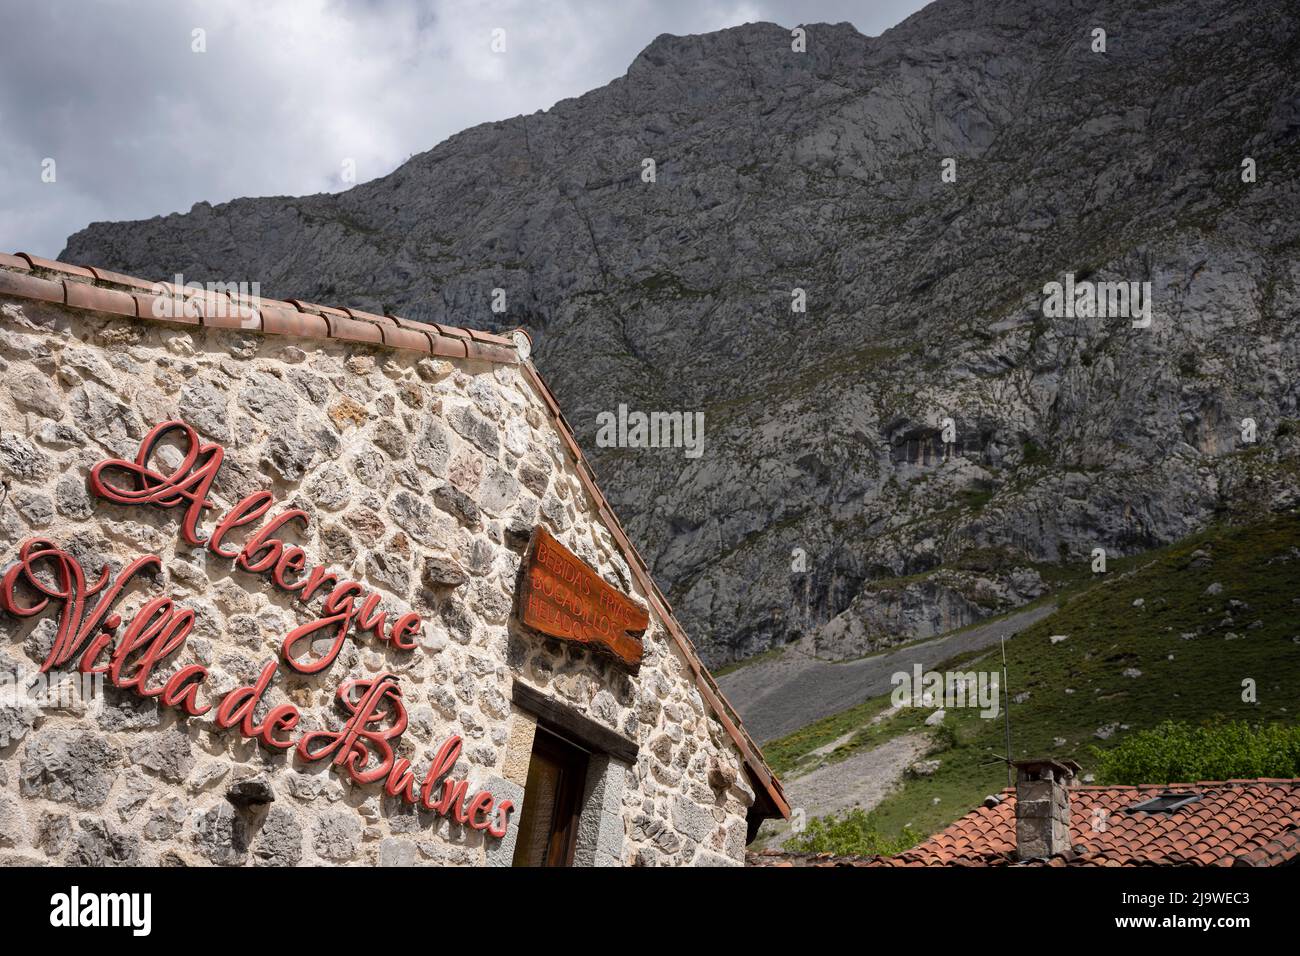 An Alberge shelter in Bulnes, a popular Spanish hiking destination for visitors to the Picos de Europa National Park, on 15th May 2022, at Bulnes, Picos Mountains, Asturias, Spain. Reached by path or by funicular railway, the tiny village of Bulnes provides overnight beds and food to passing walkers. Stock Photo